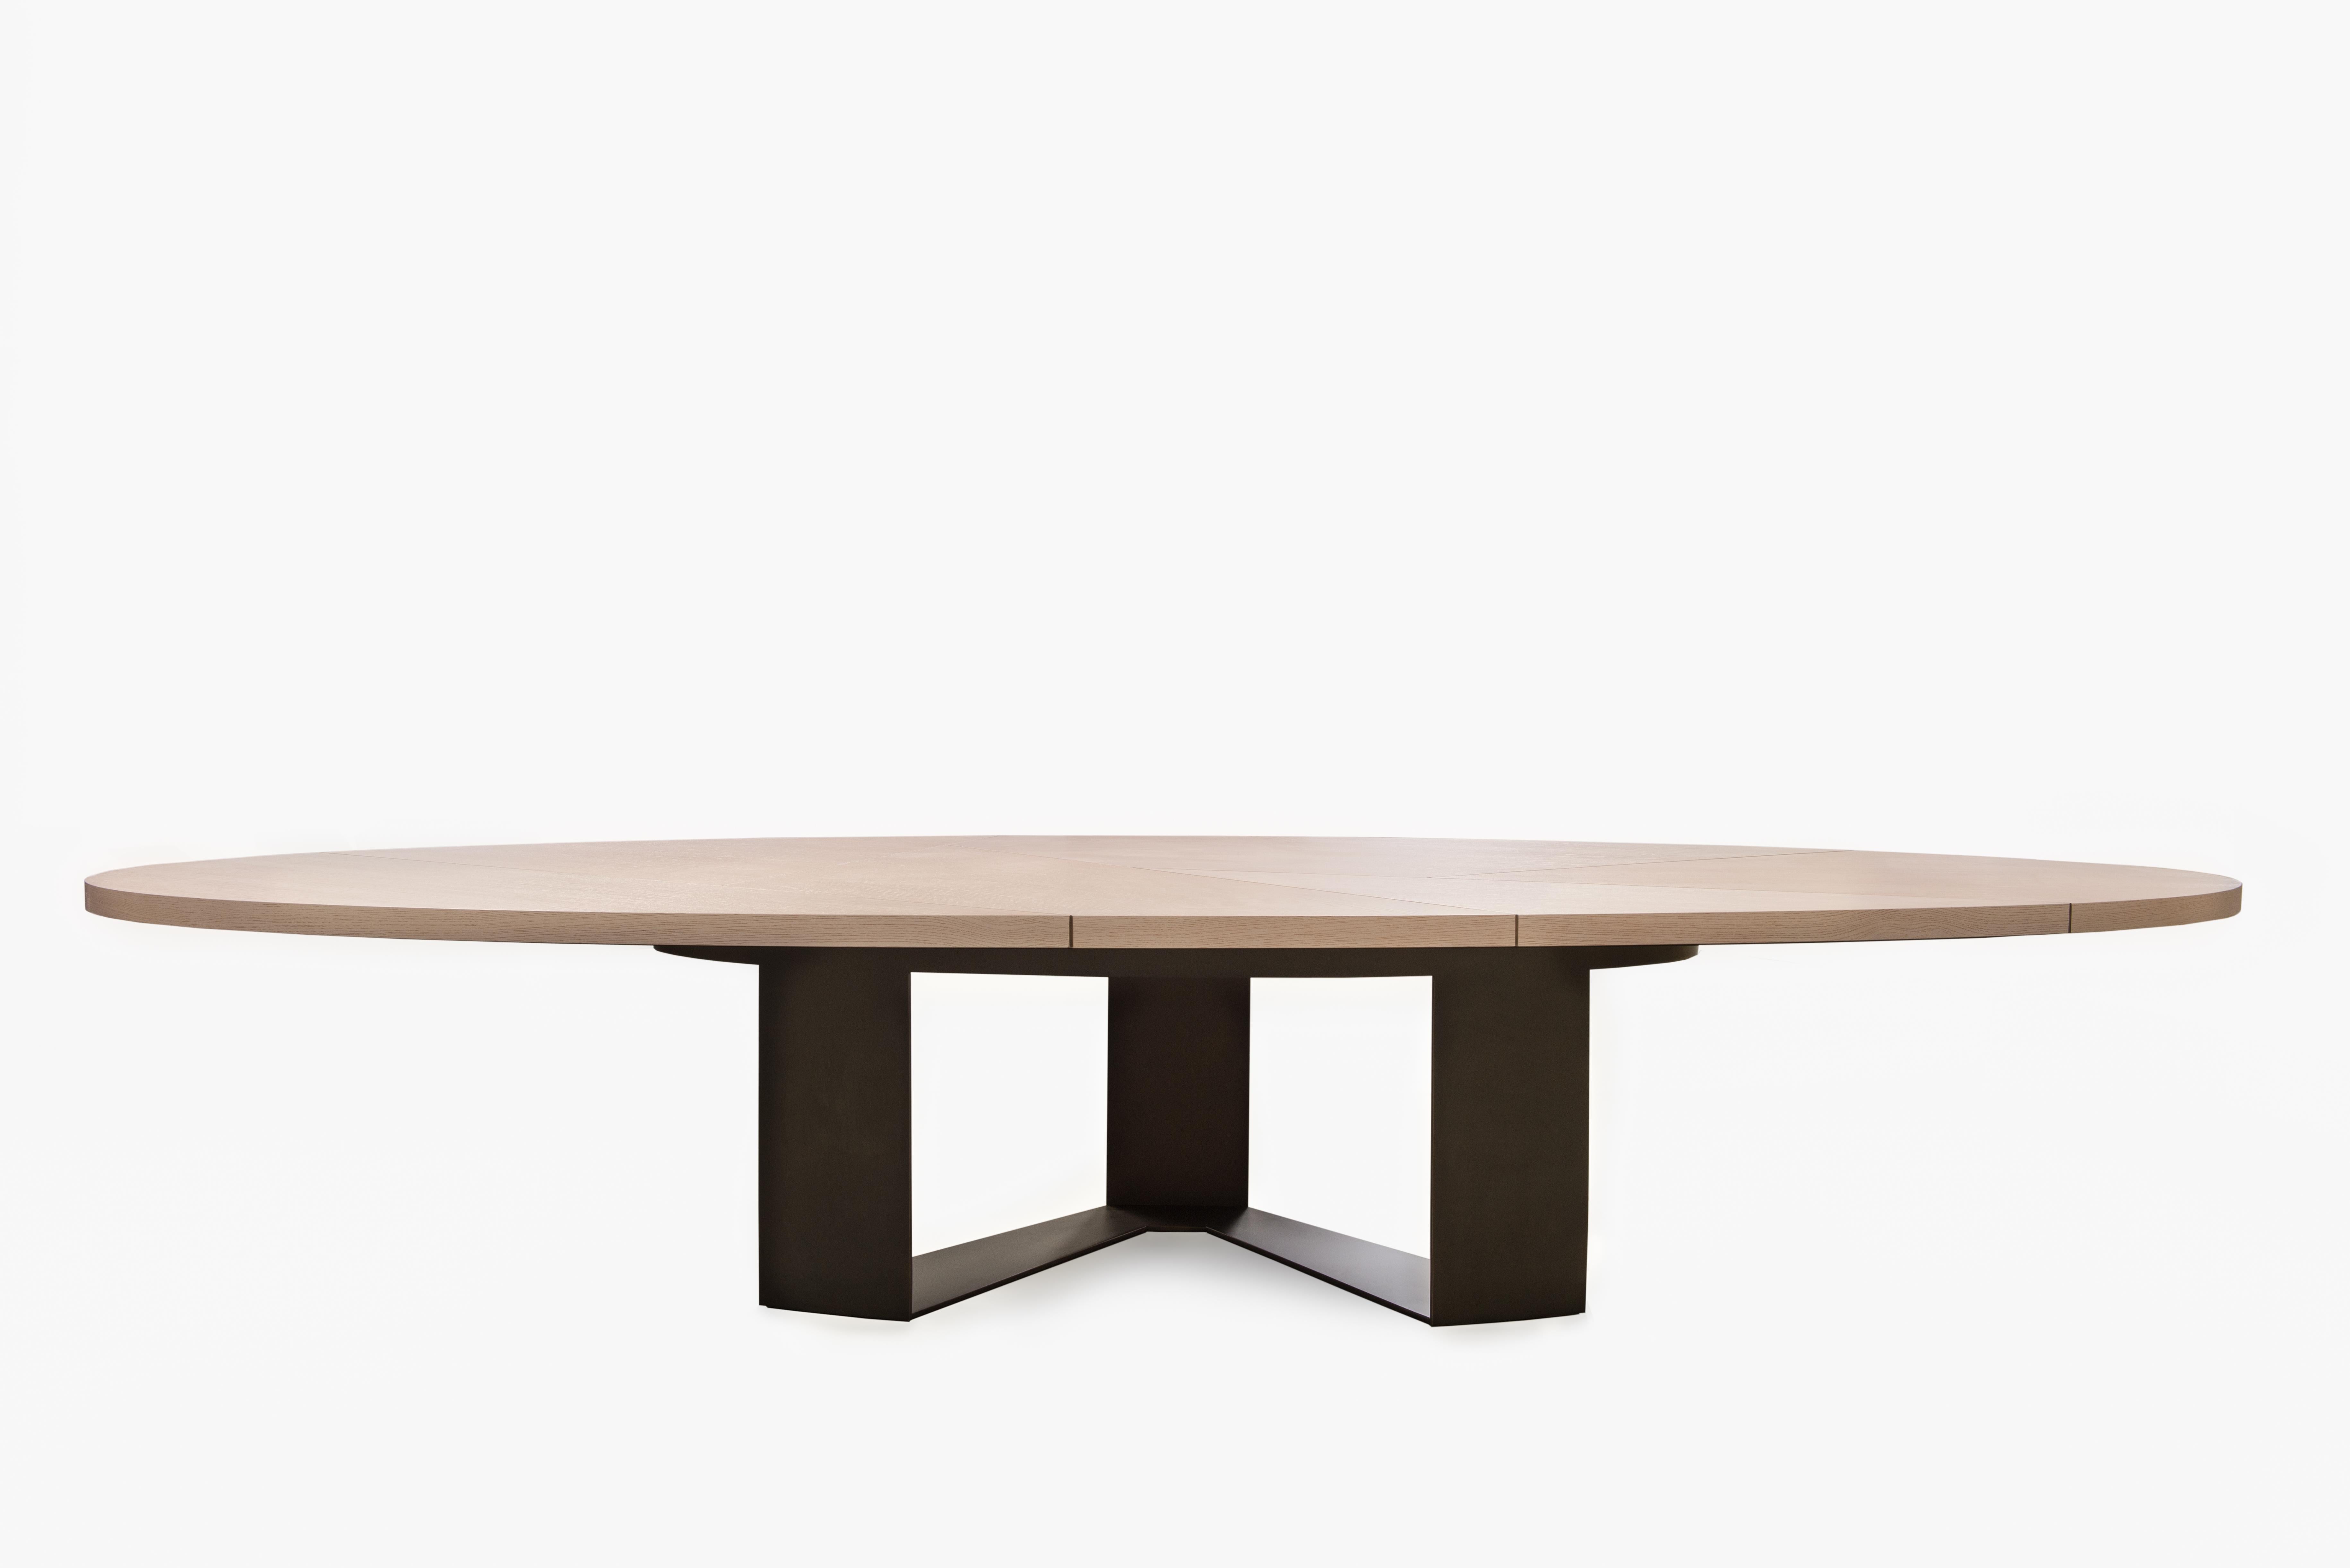 Create a casual dining setting with the Aurora Dining Table and watch it bring a sense of style and industrialism to your dining room.

The Aurora Dining Table uses the trilateral base of the Aurora Coffee Table, its predecessor. The wide timber top